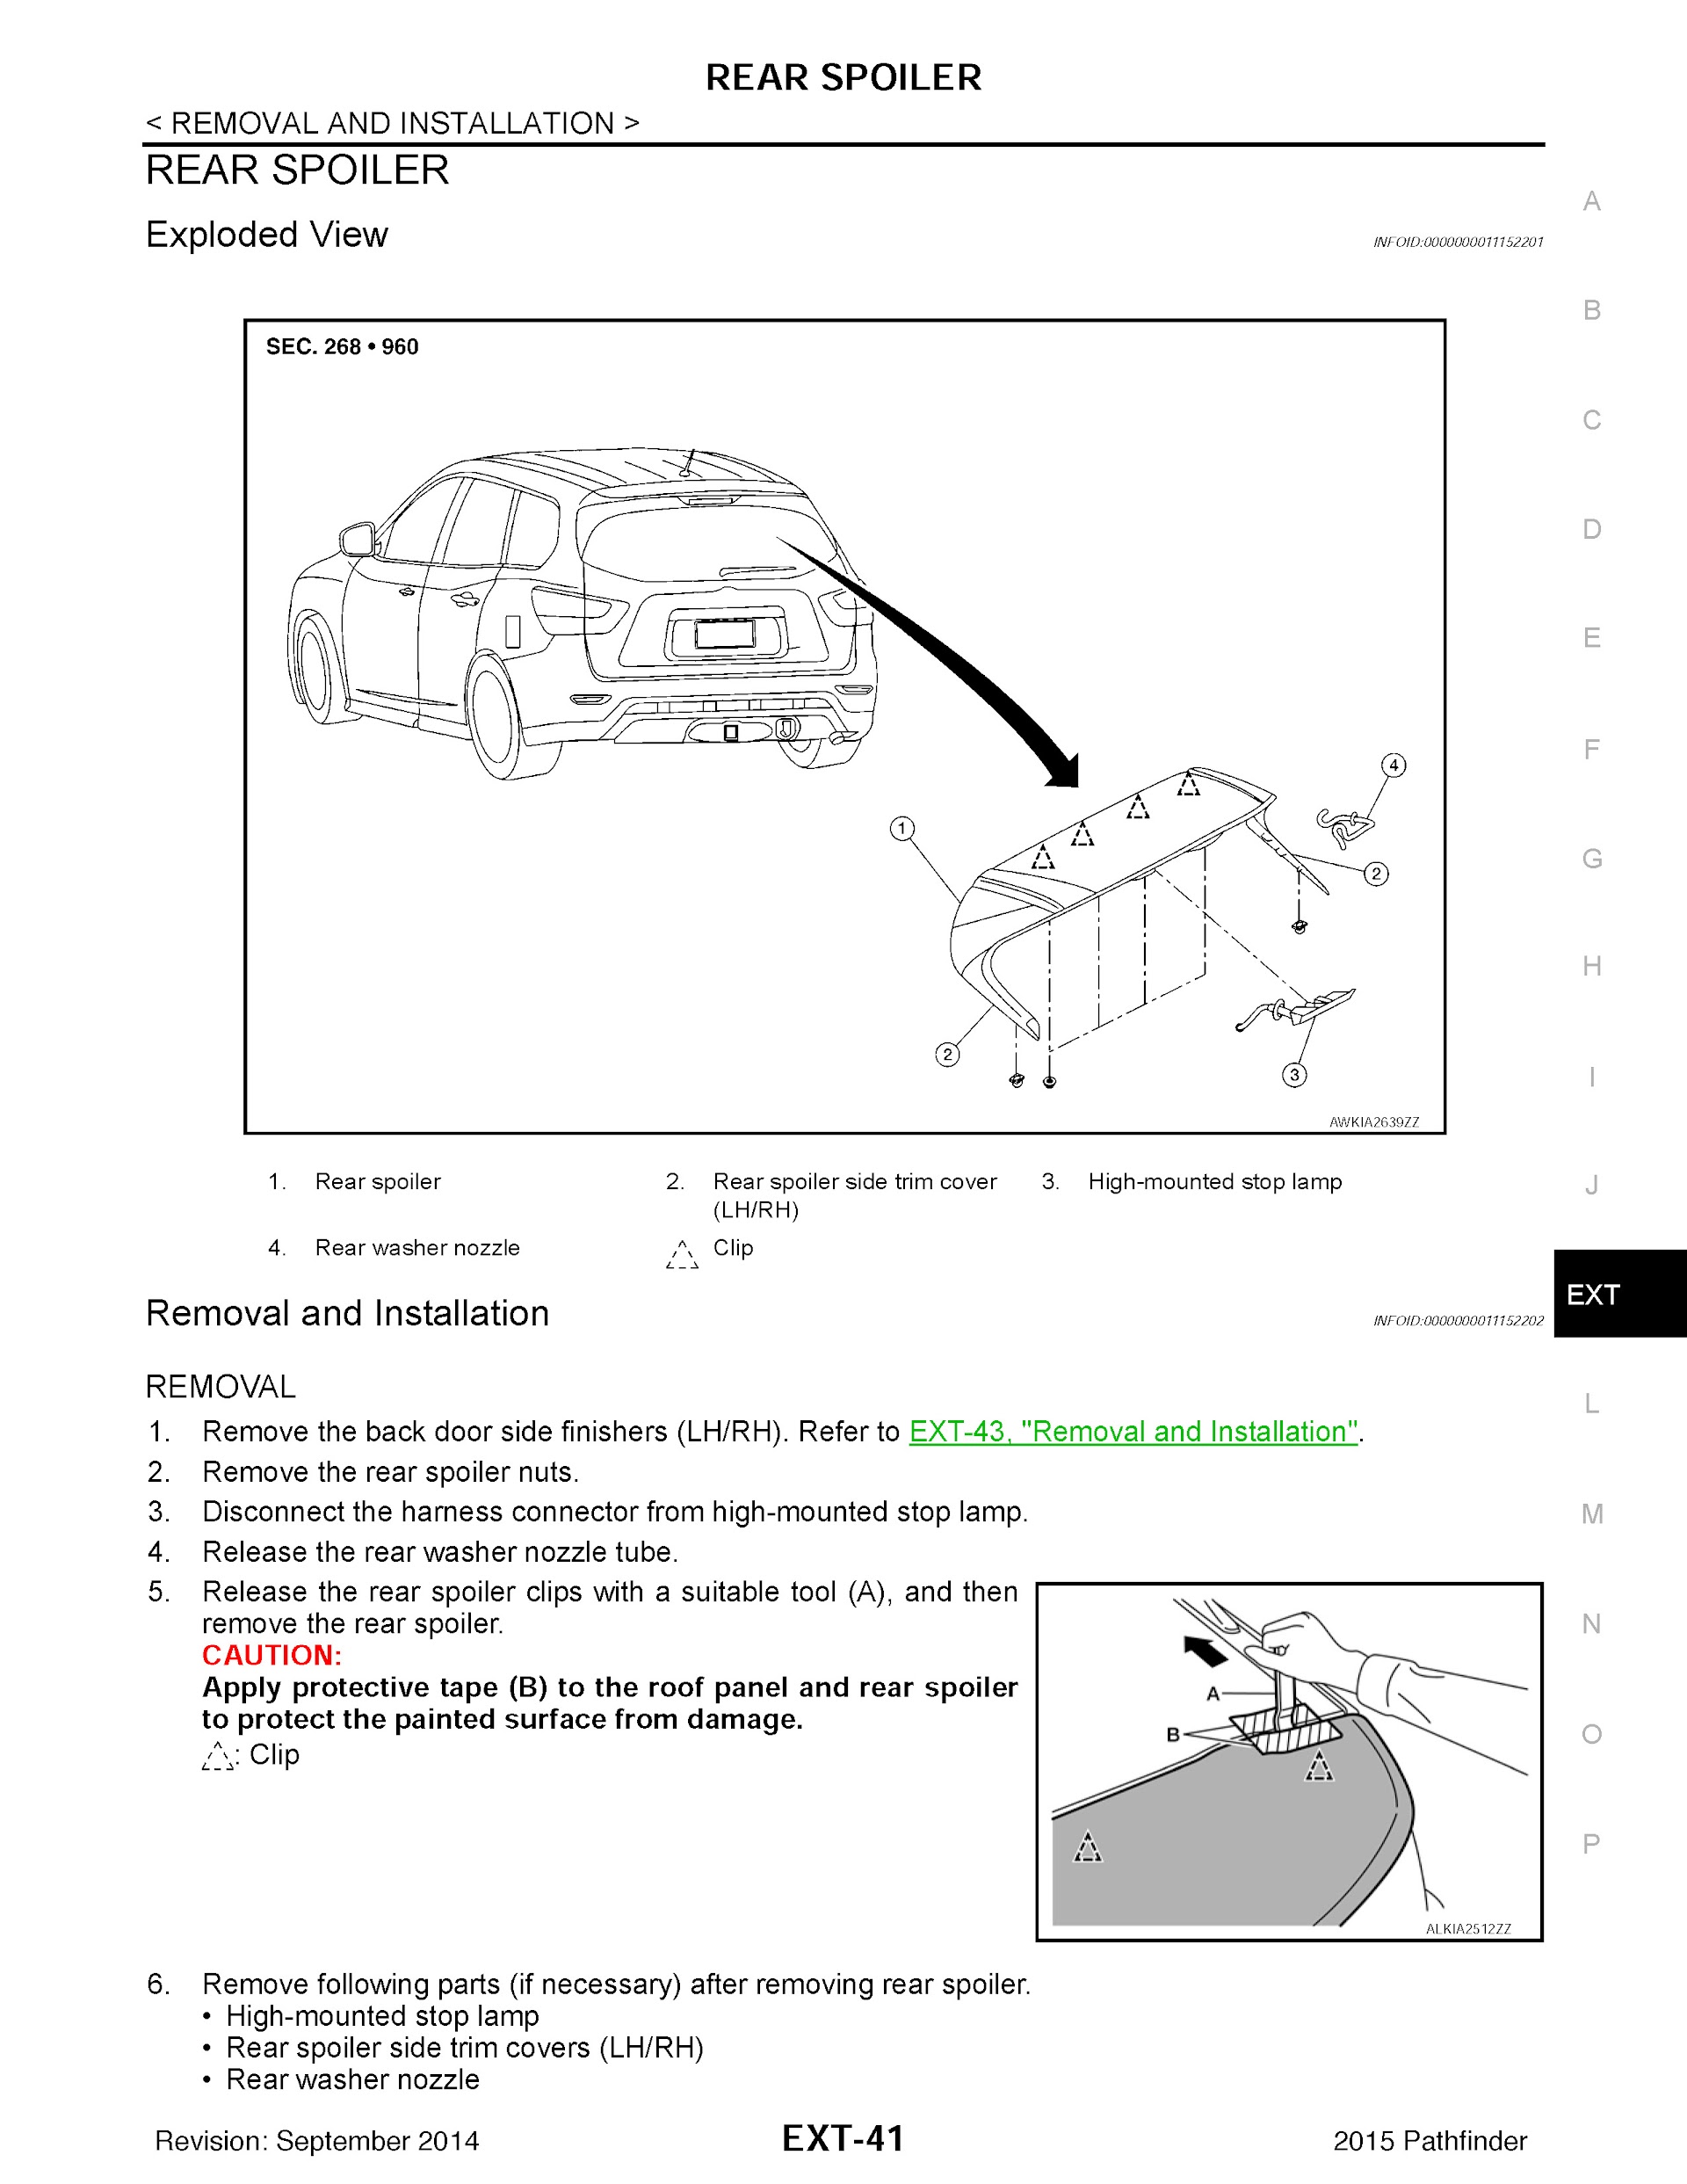 2015 Nissan Pathfinder Repair Manual, Rear Spoiler Removal and Installation